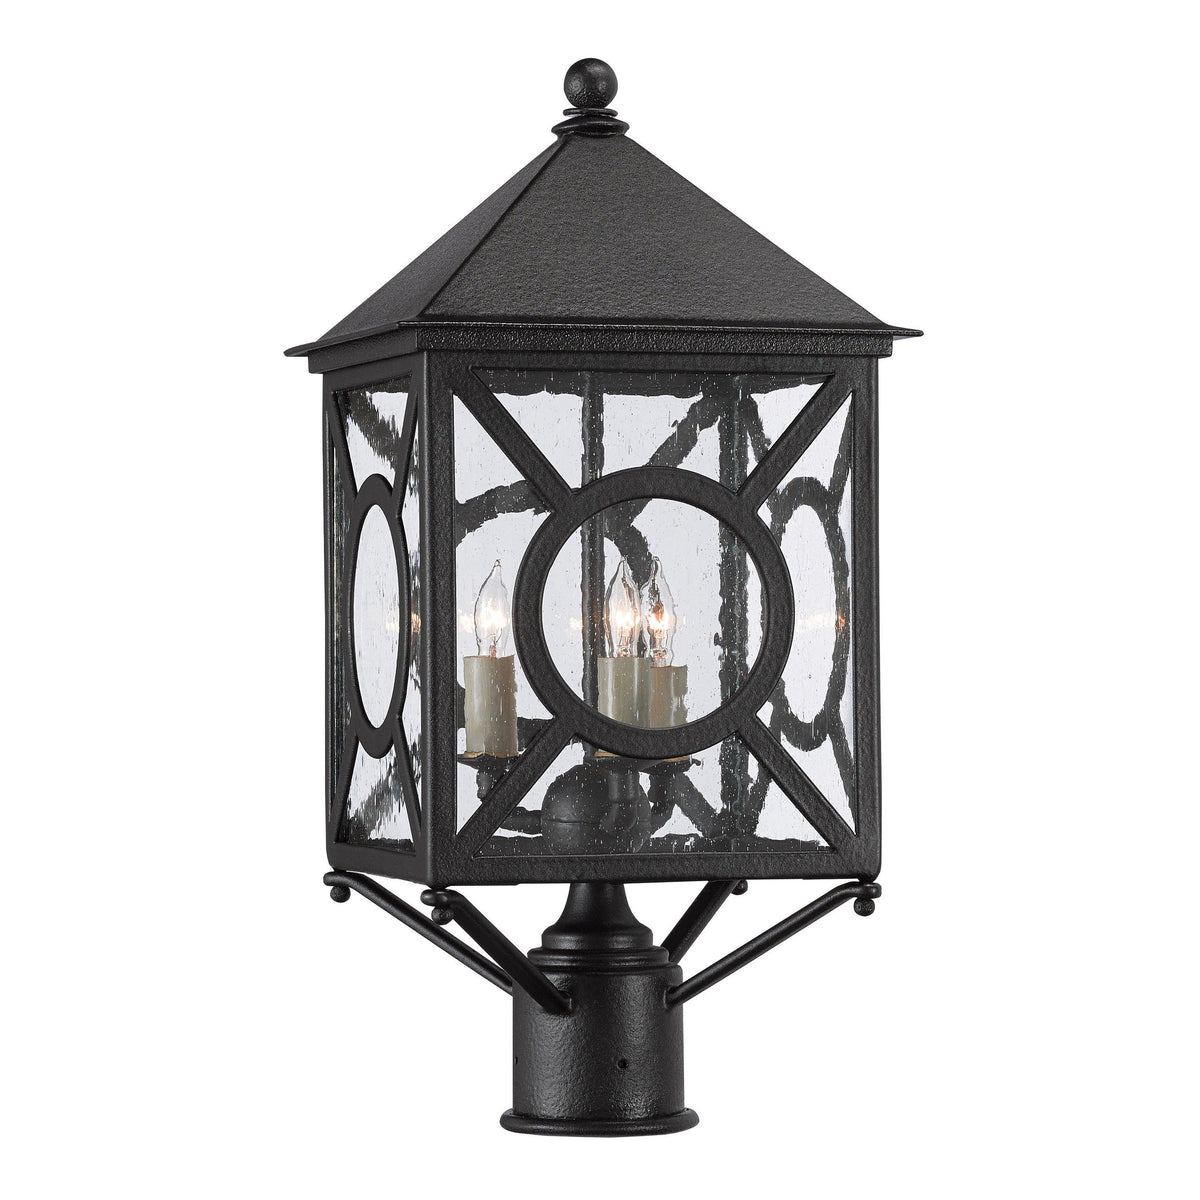 Currey and Company - Ripley Post Mount - 9600-0001 | Montreal Lighting & Hardware